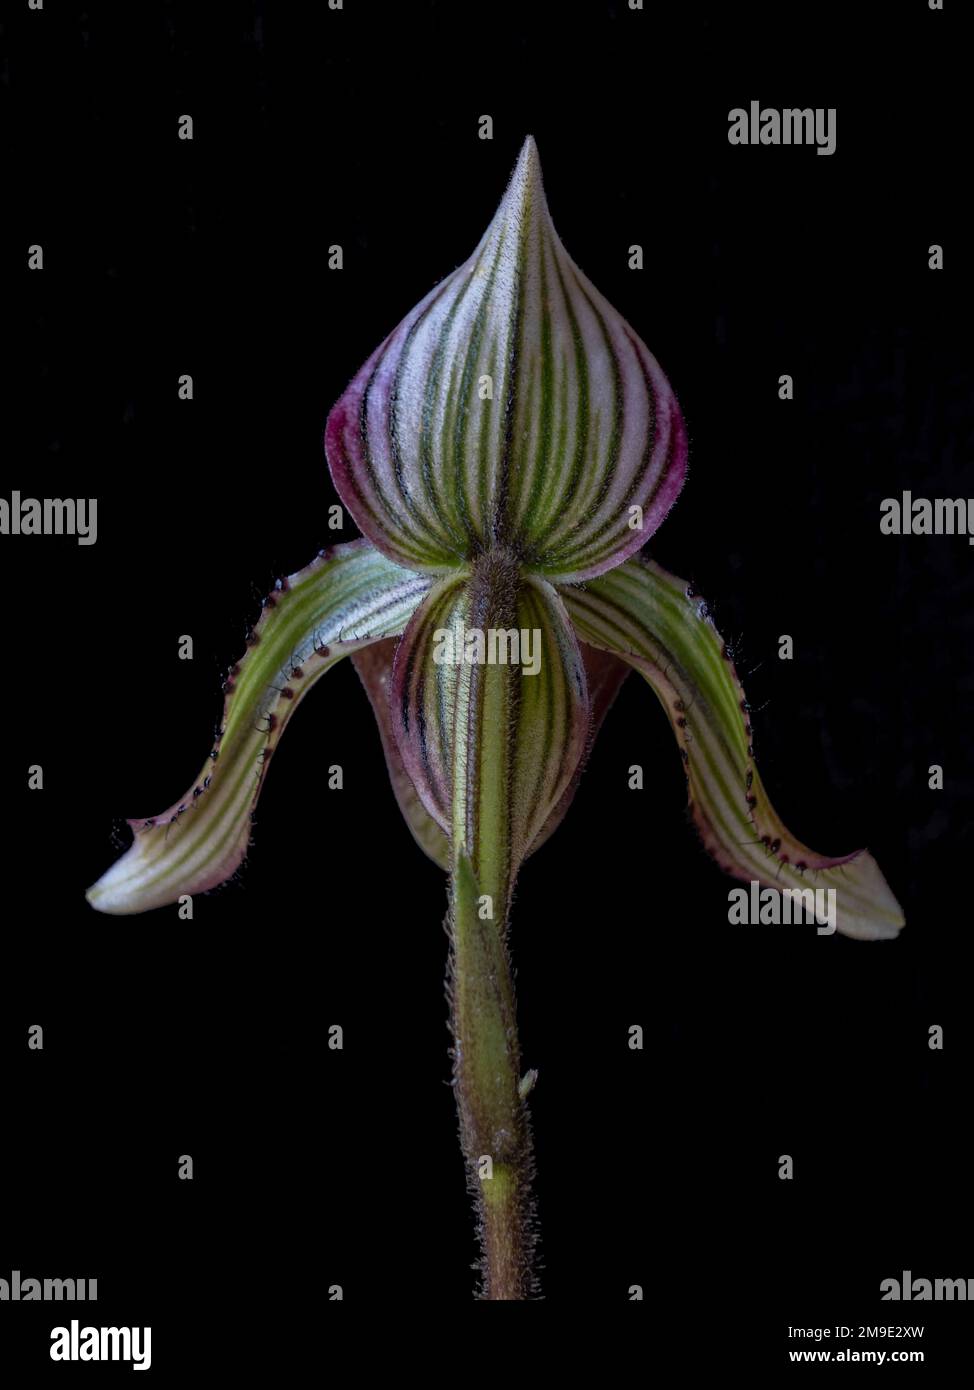 Back side closeup view of beautiful purple, green and white lady slipper orchid flower paphiopedilum fowliei species isolated on black background Stock Photo